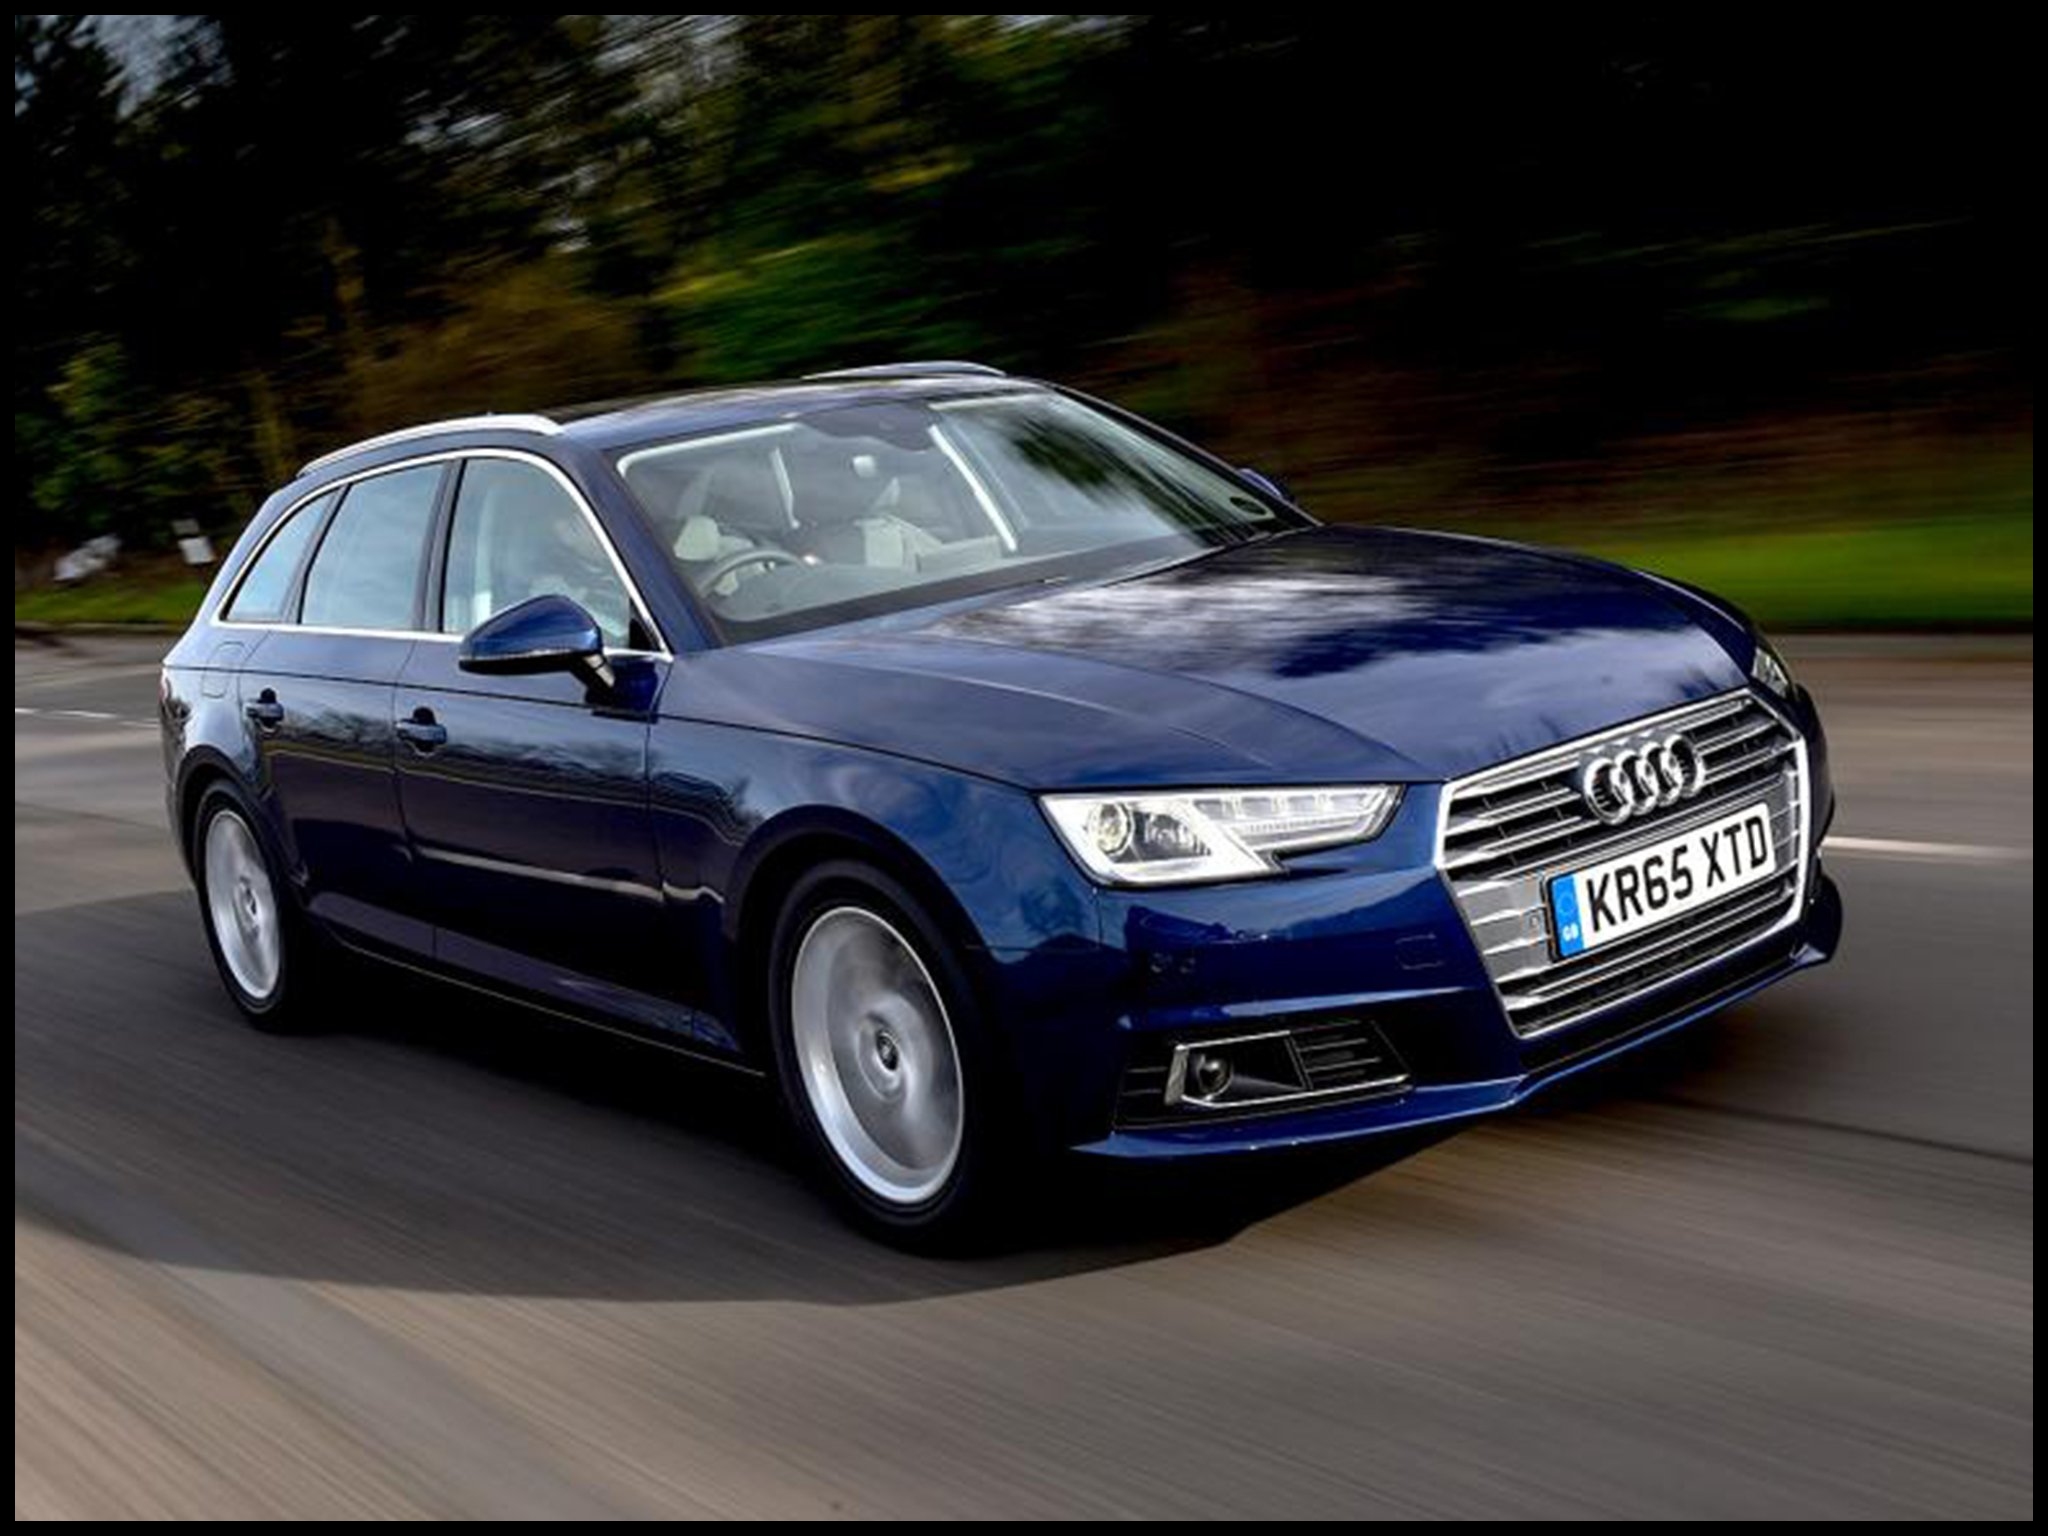 Audi A4 Avant 2 0 TDI 150 Ultra Sport car review fering economy and style